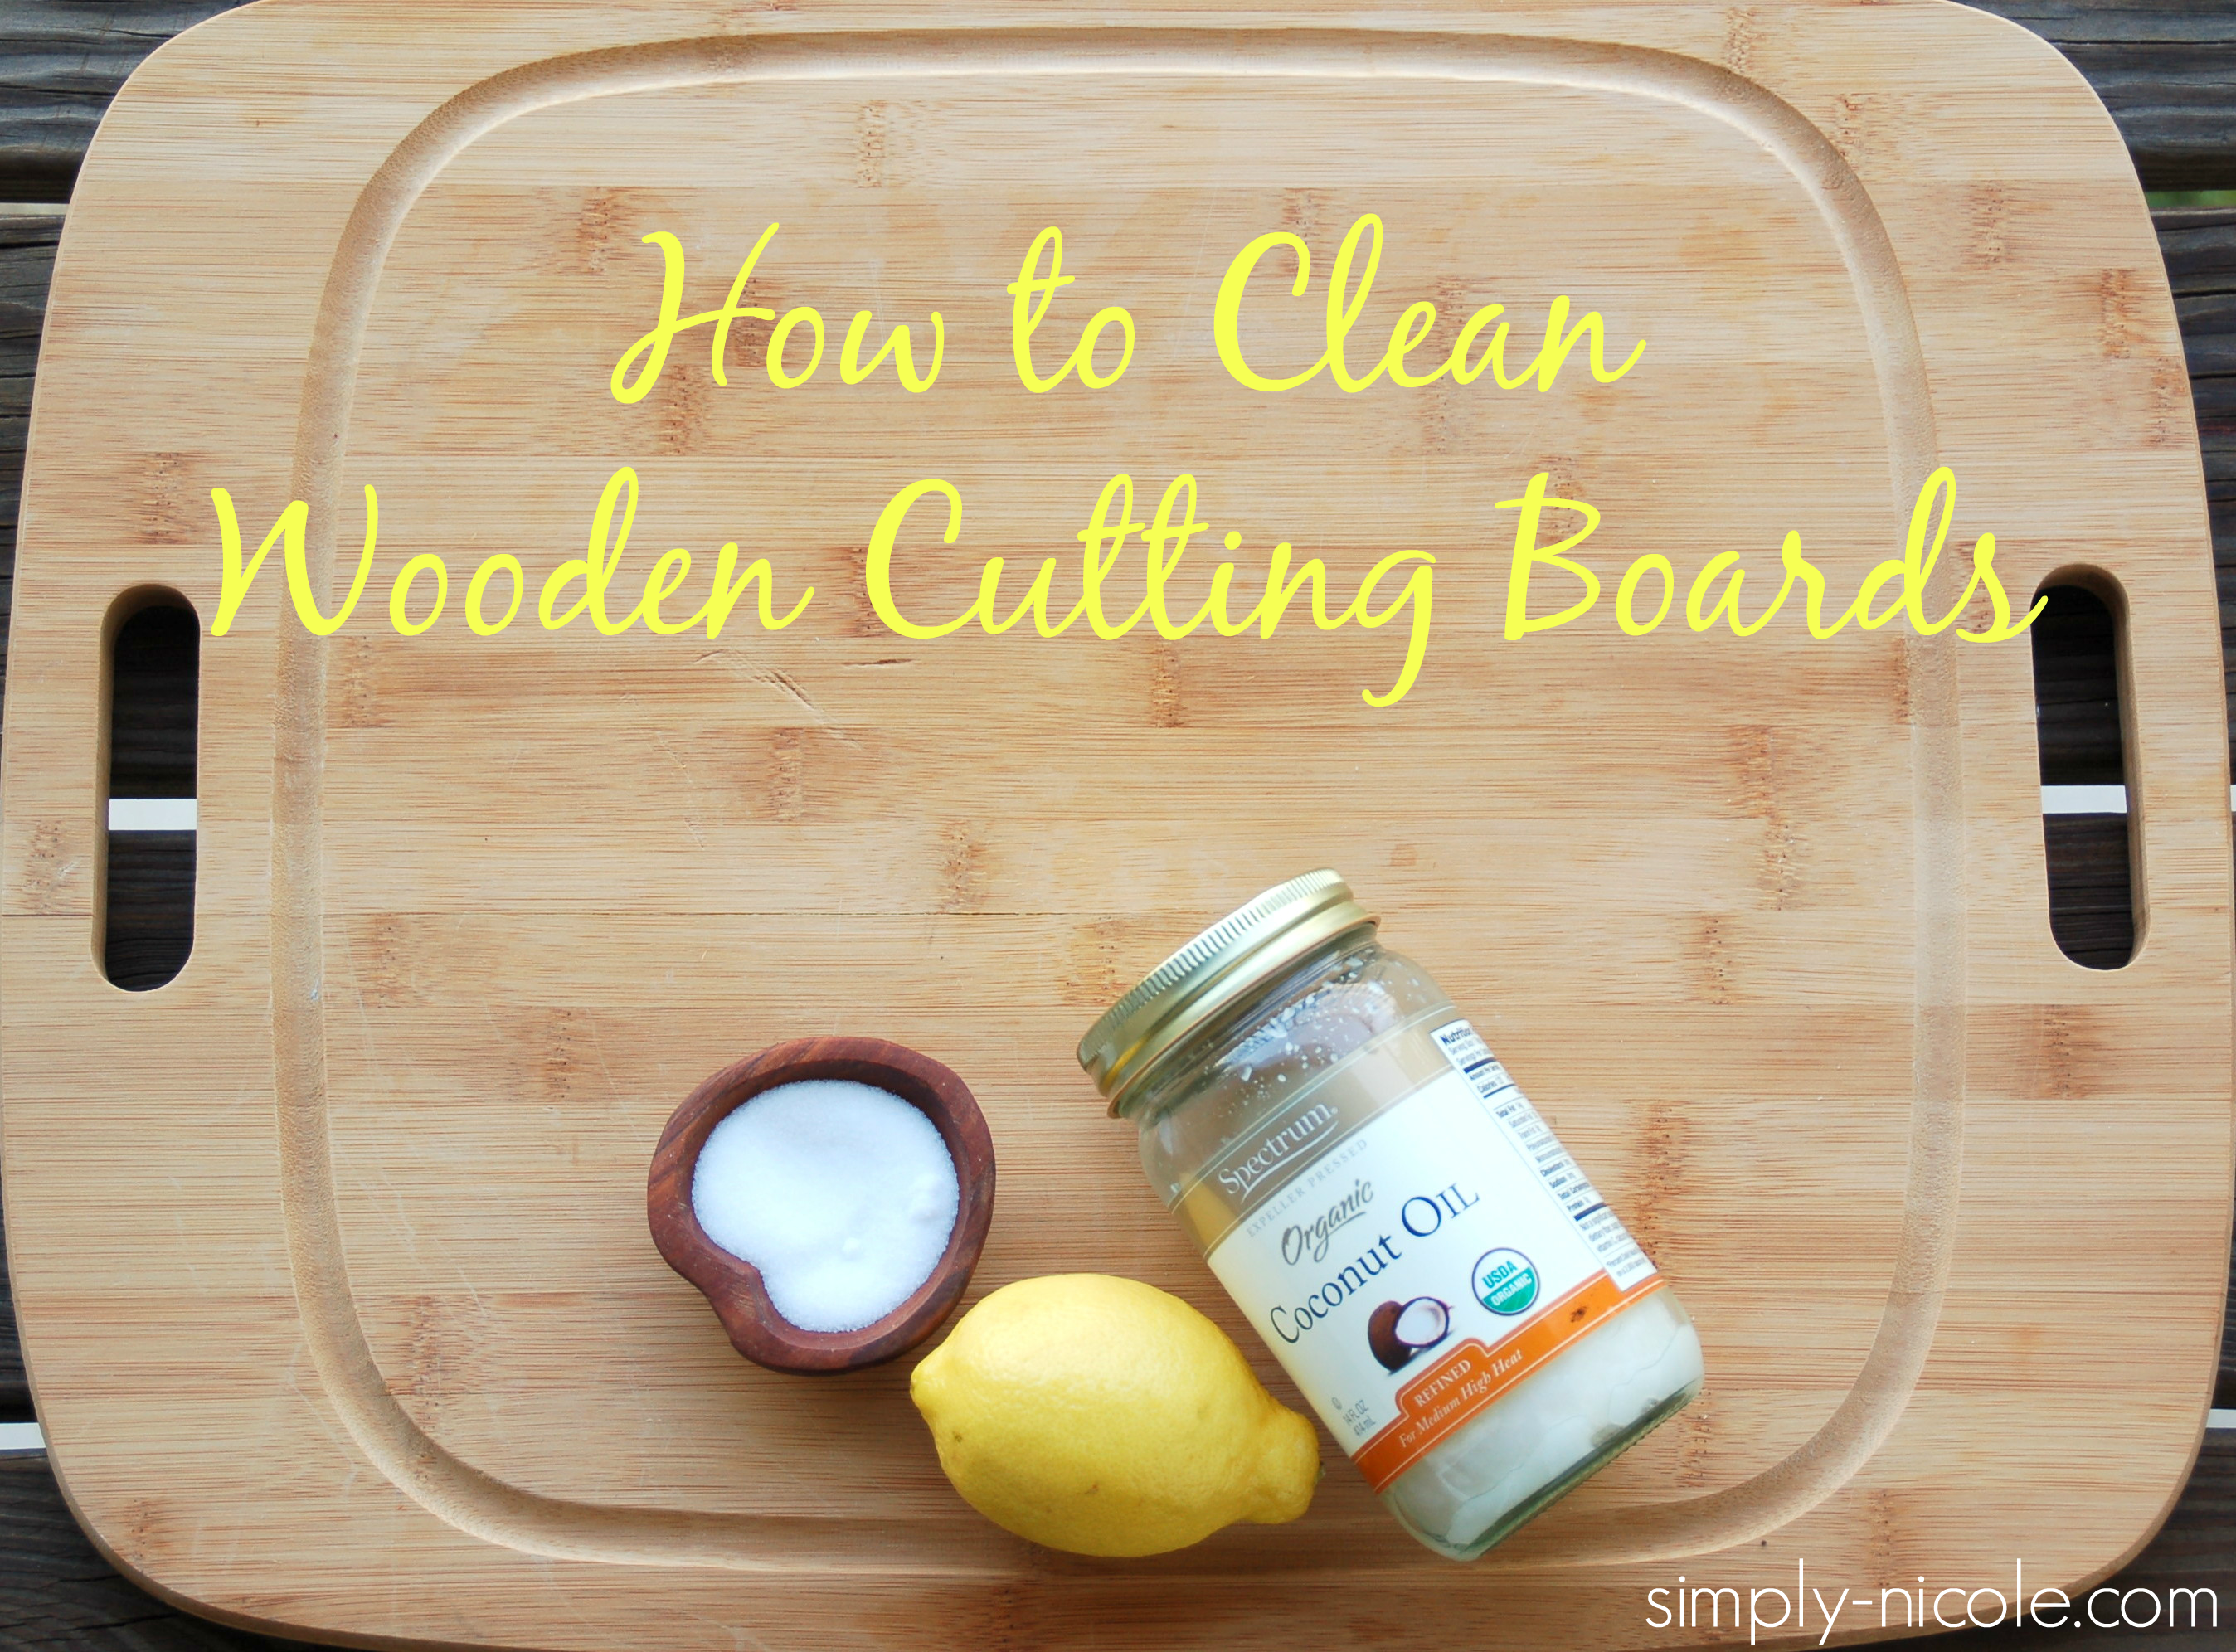 How to Clean Wooden Cutting Boards at simply-nicole.com